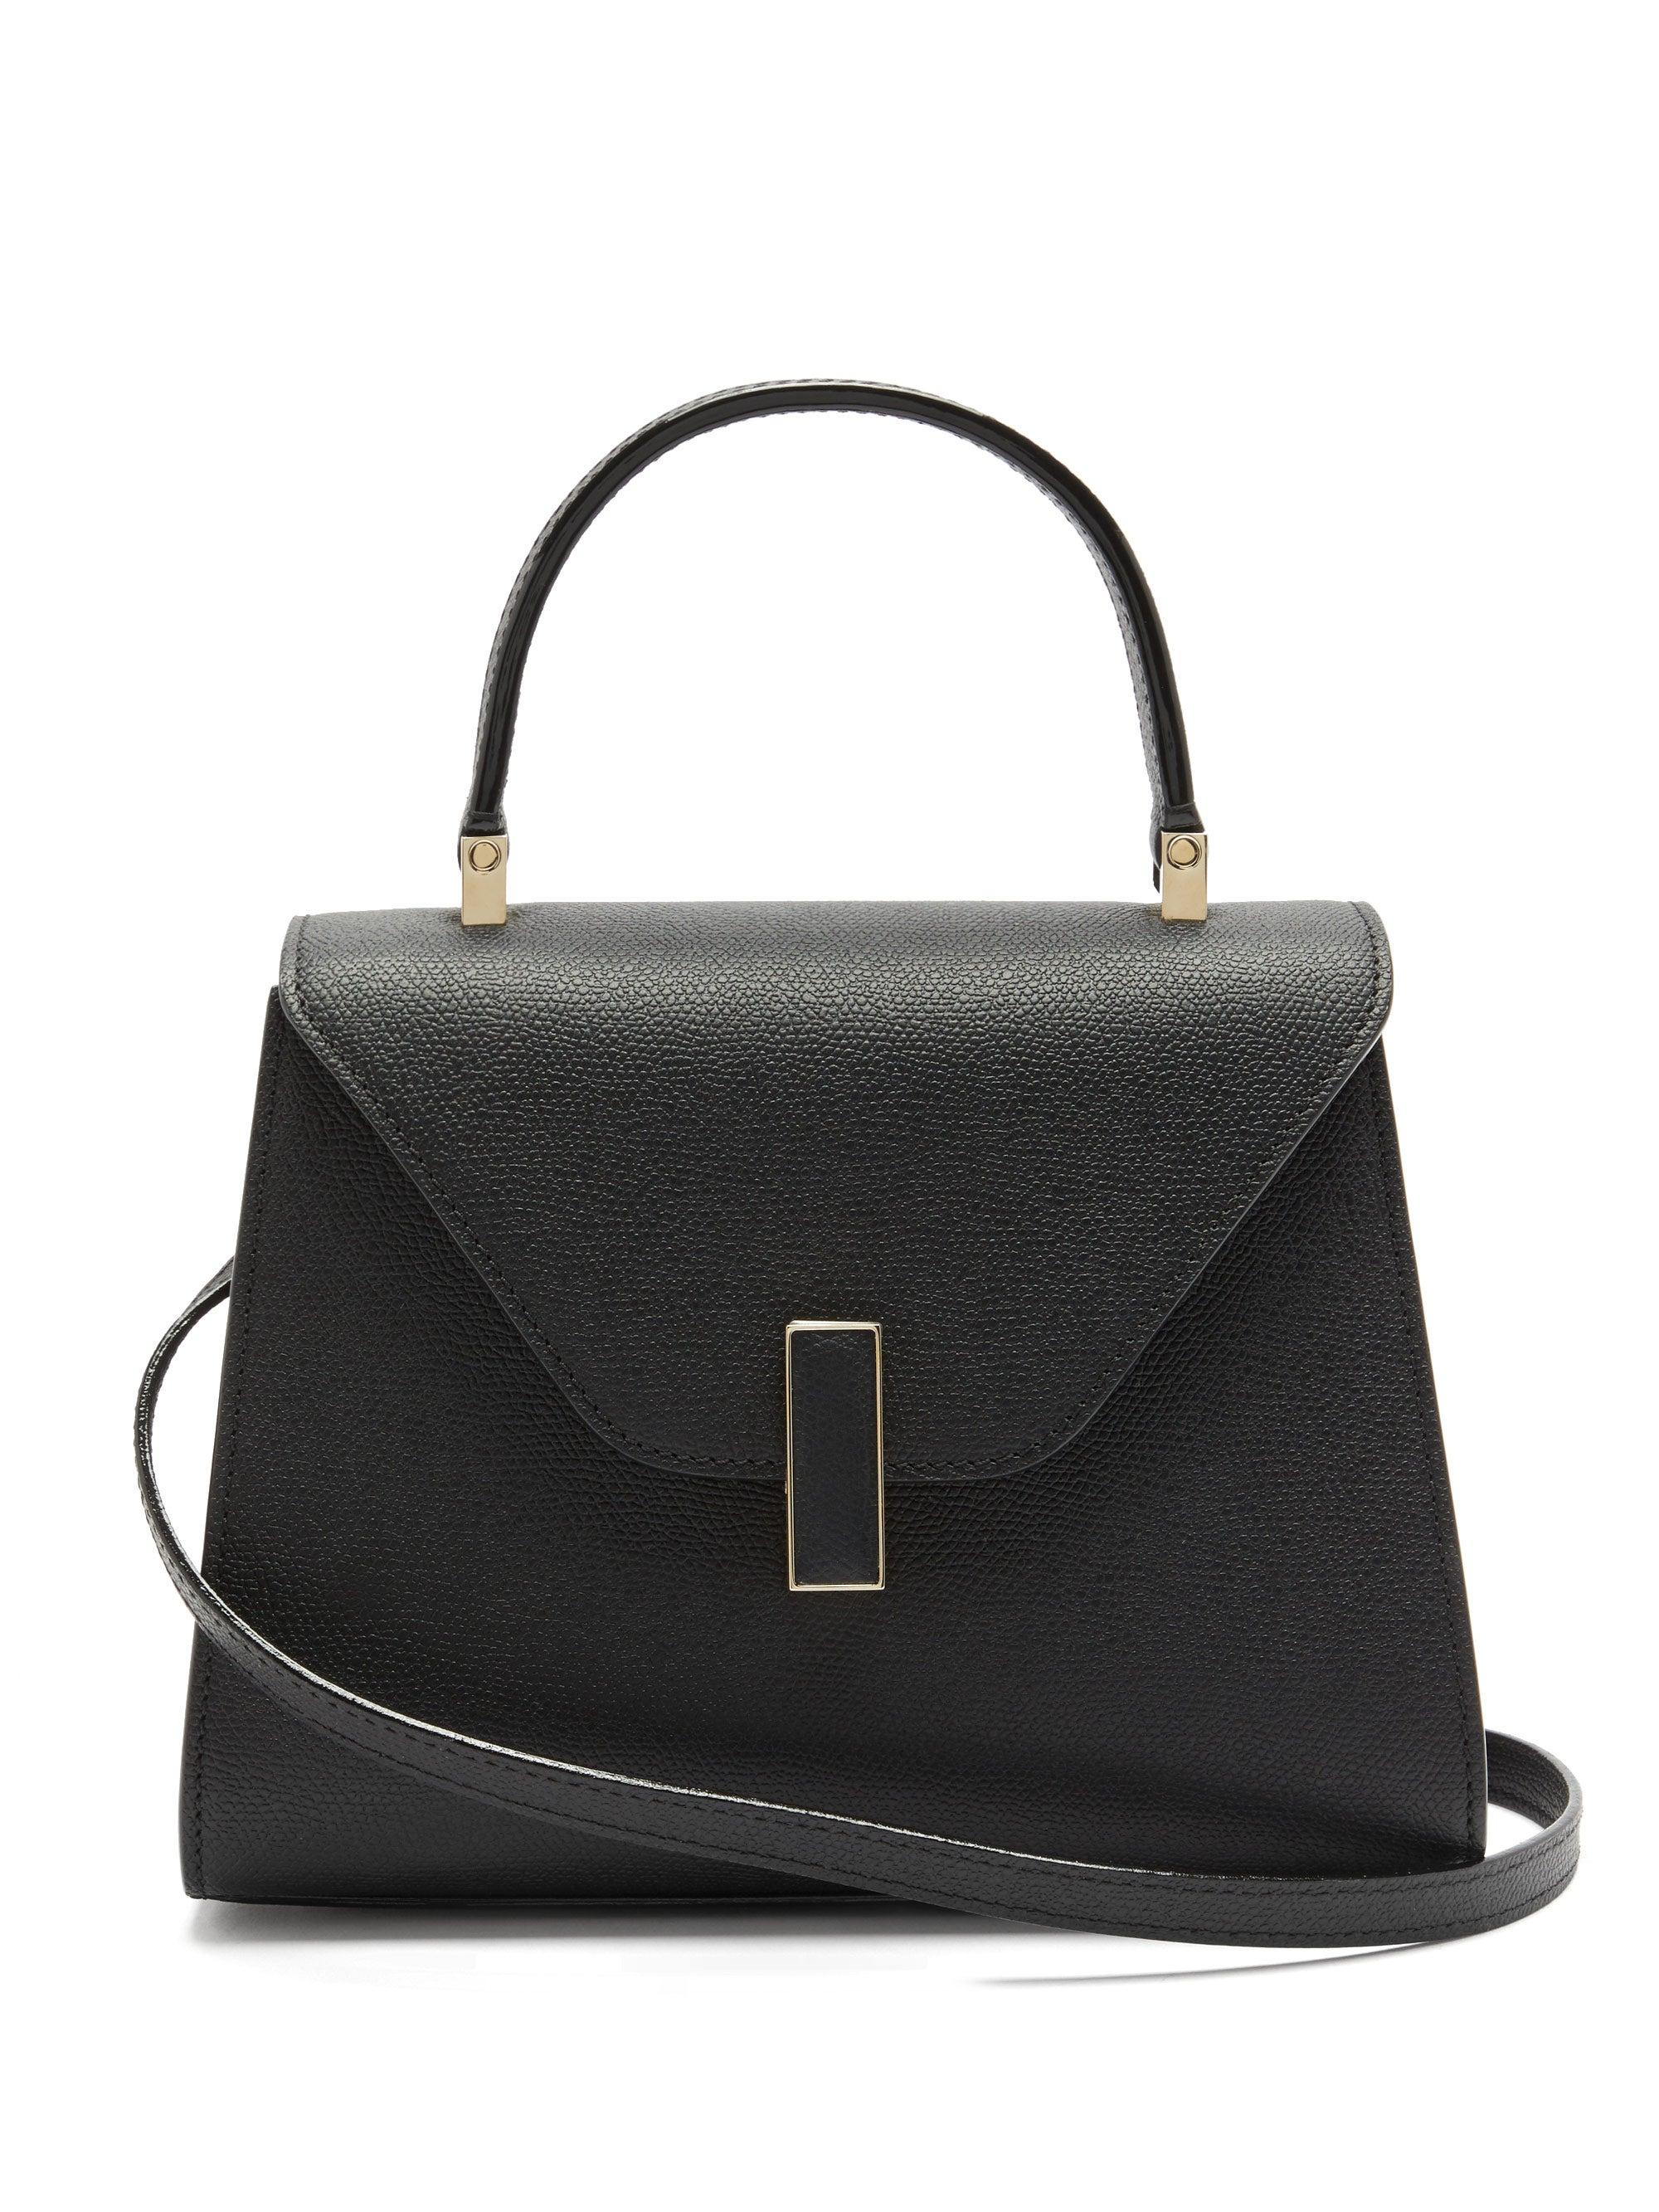 Valextra Iside Mini Grained-leather Bag in Black - Lyst